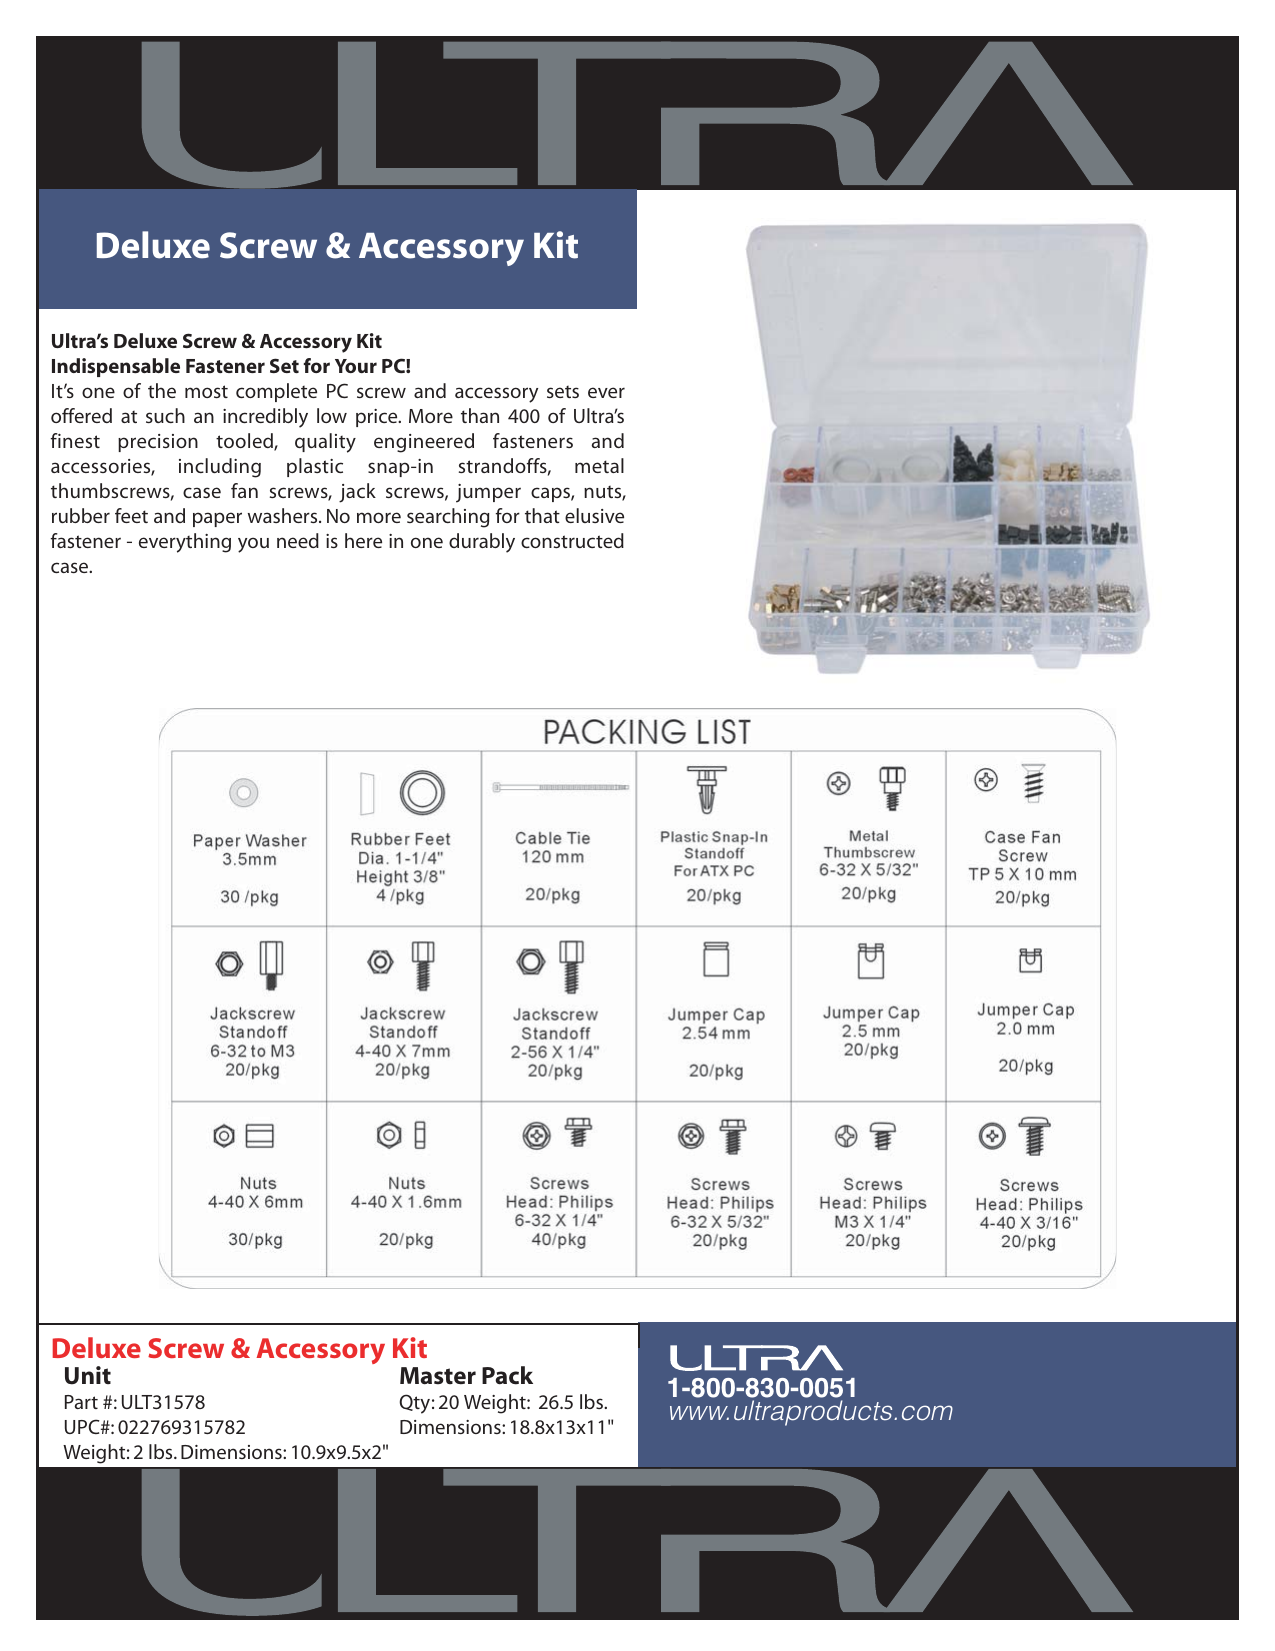 Ultra Deluxe Screw & Accessary Kit ULT31578 